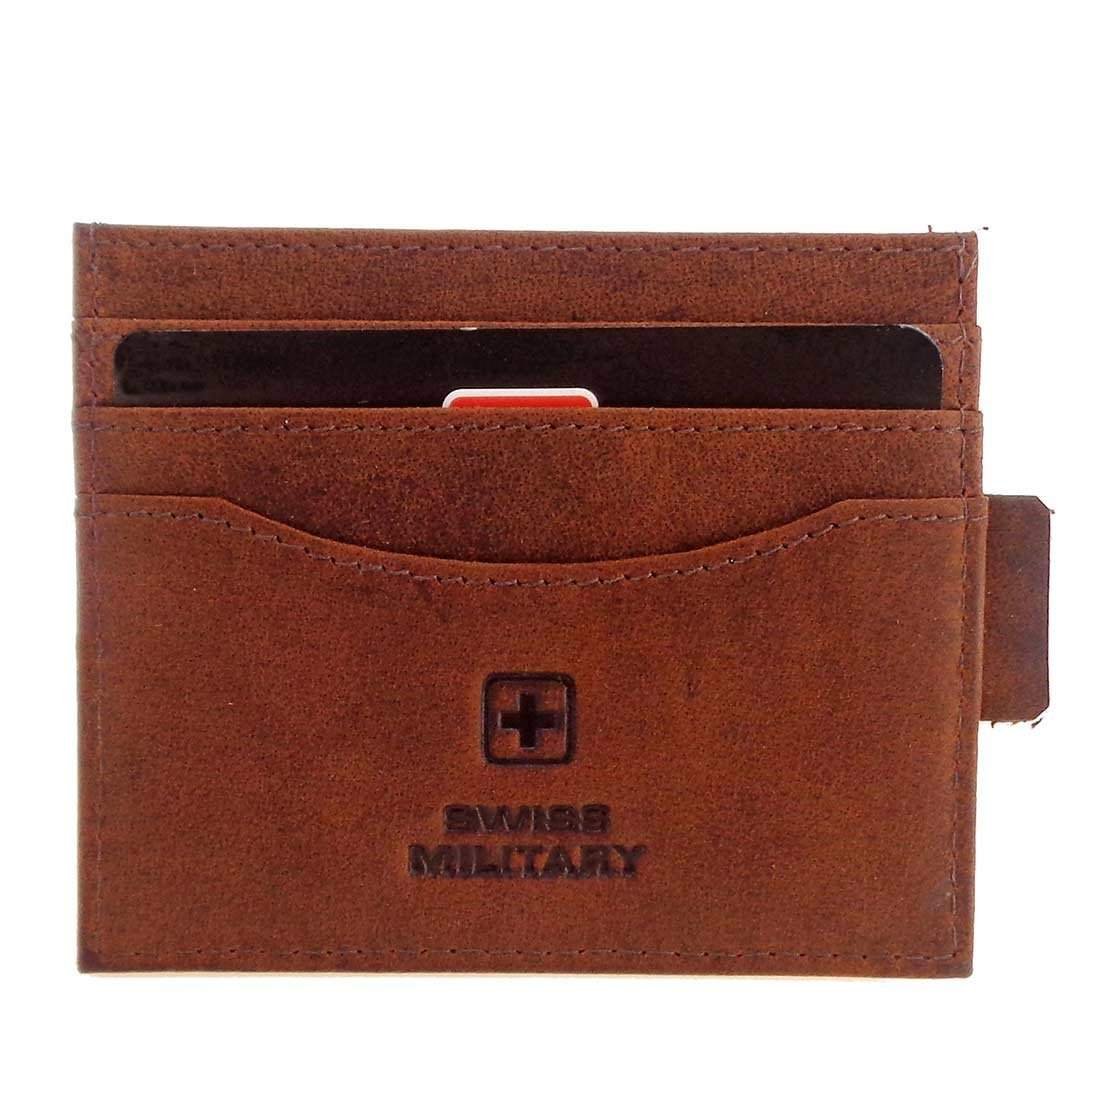 Swiss Military Leather wallet LW1, Card Slots: 5 at Rs 675 in Delhi